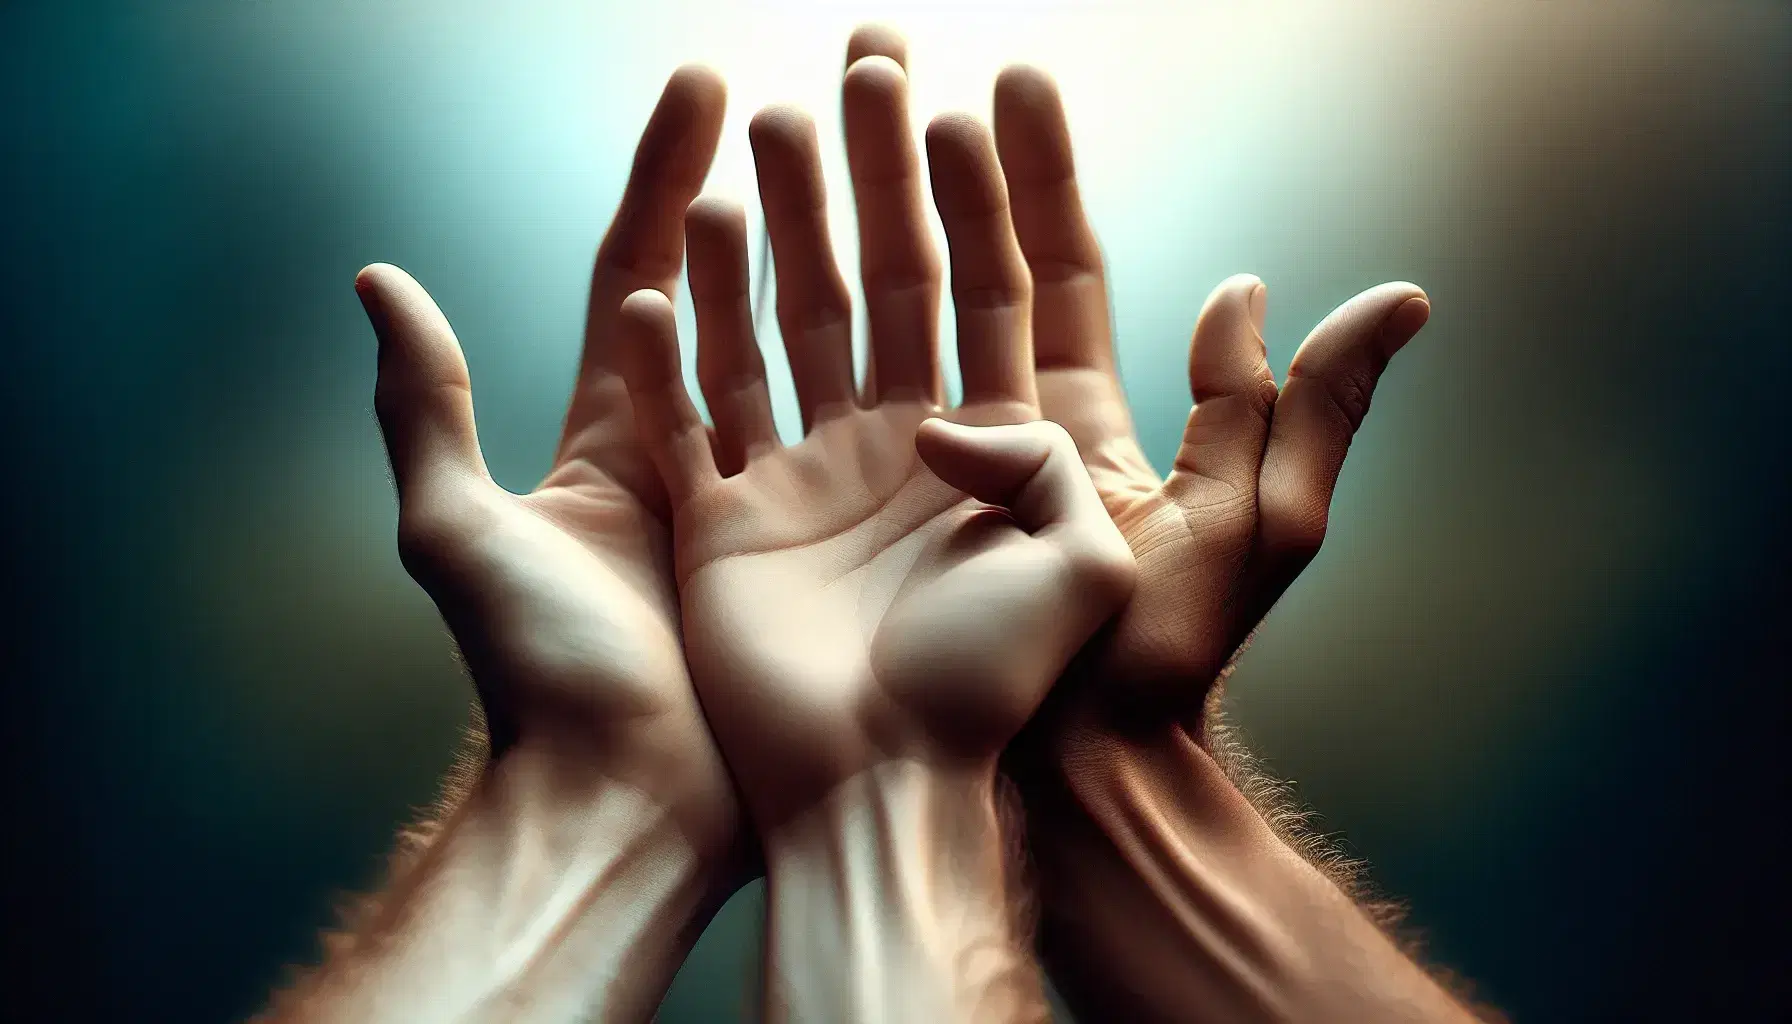 Three diverse hands in ascending order frame an invisible object against a blurred green and blue background, symbolizing unity and diversity.